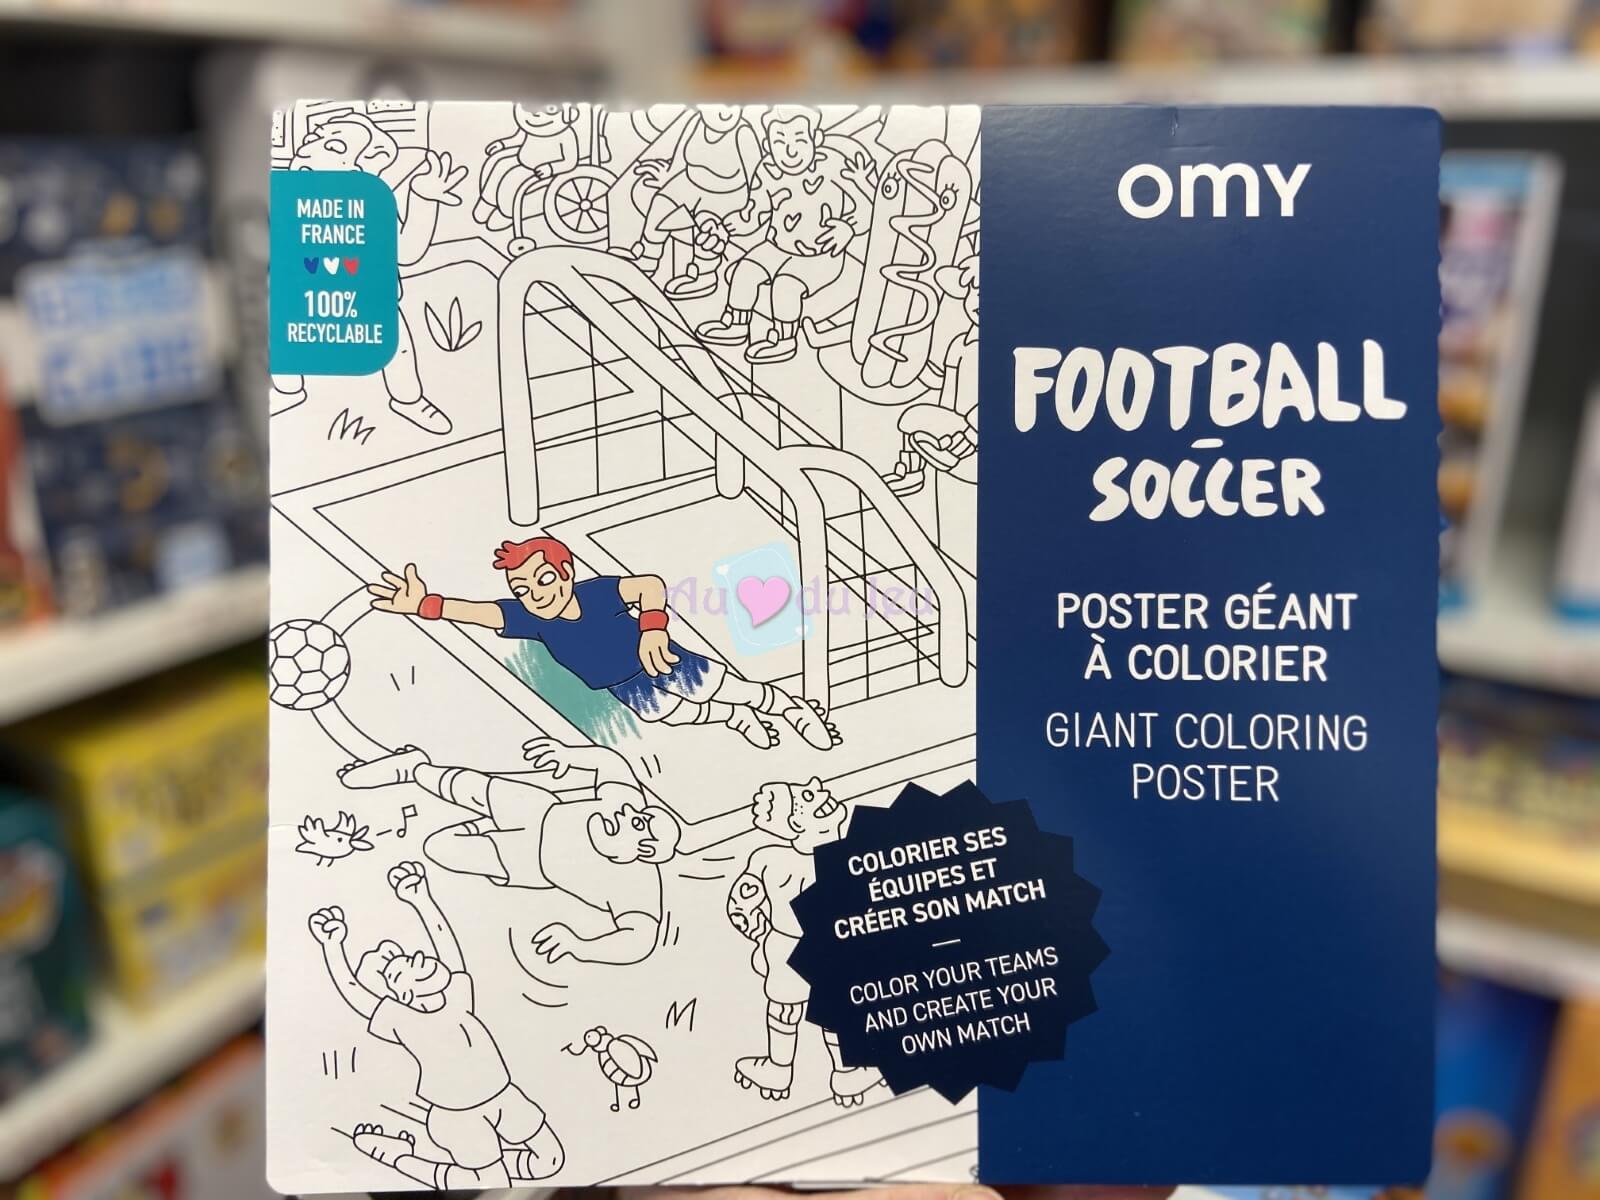 Poster Géant A Colorier Football OMY